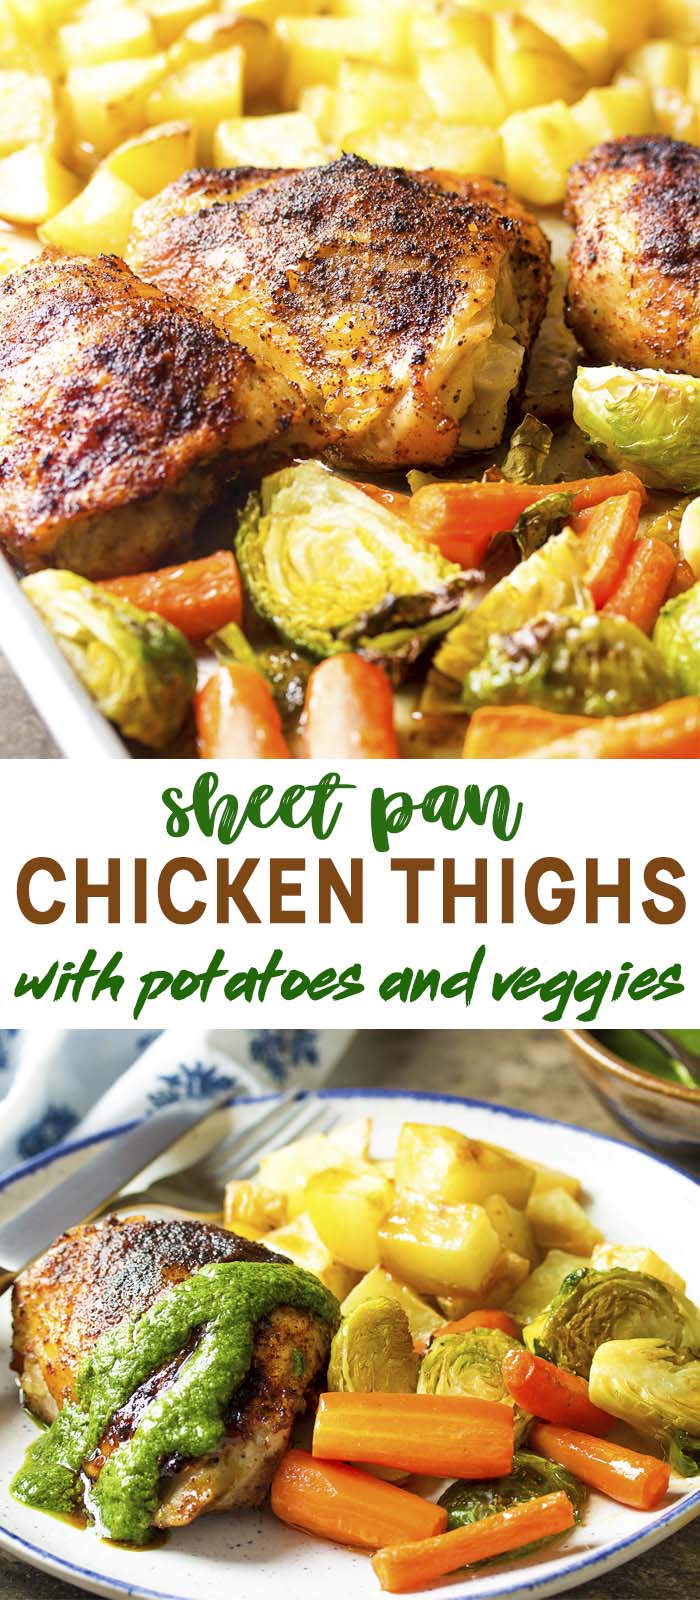 Chicken, vegetables, and green sauce on a plate with text overlay - Sheet Pan Roast Chicken.